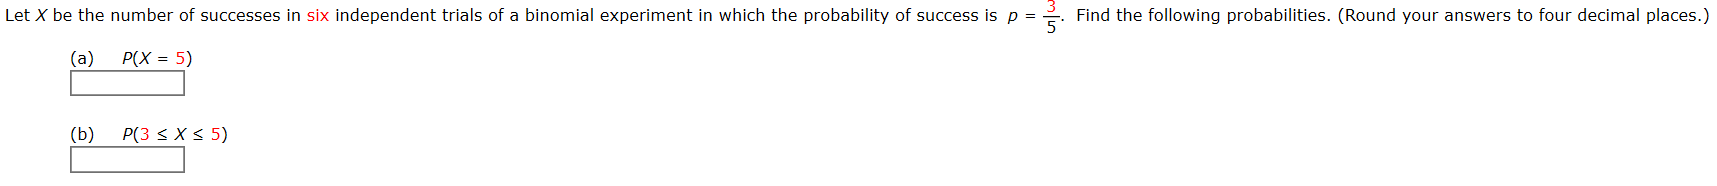 Let X be the number of successes in six independent trials of a binomial experiment in which the probability of success is p =
Find the following probabilities. (Round your answers to four decimal places.)
(a)
P(X = 5)
(b)
P(3 < X < 5)
